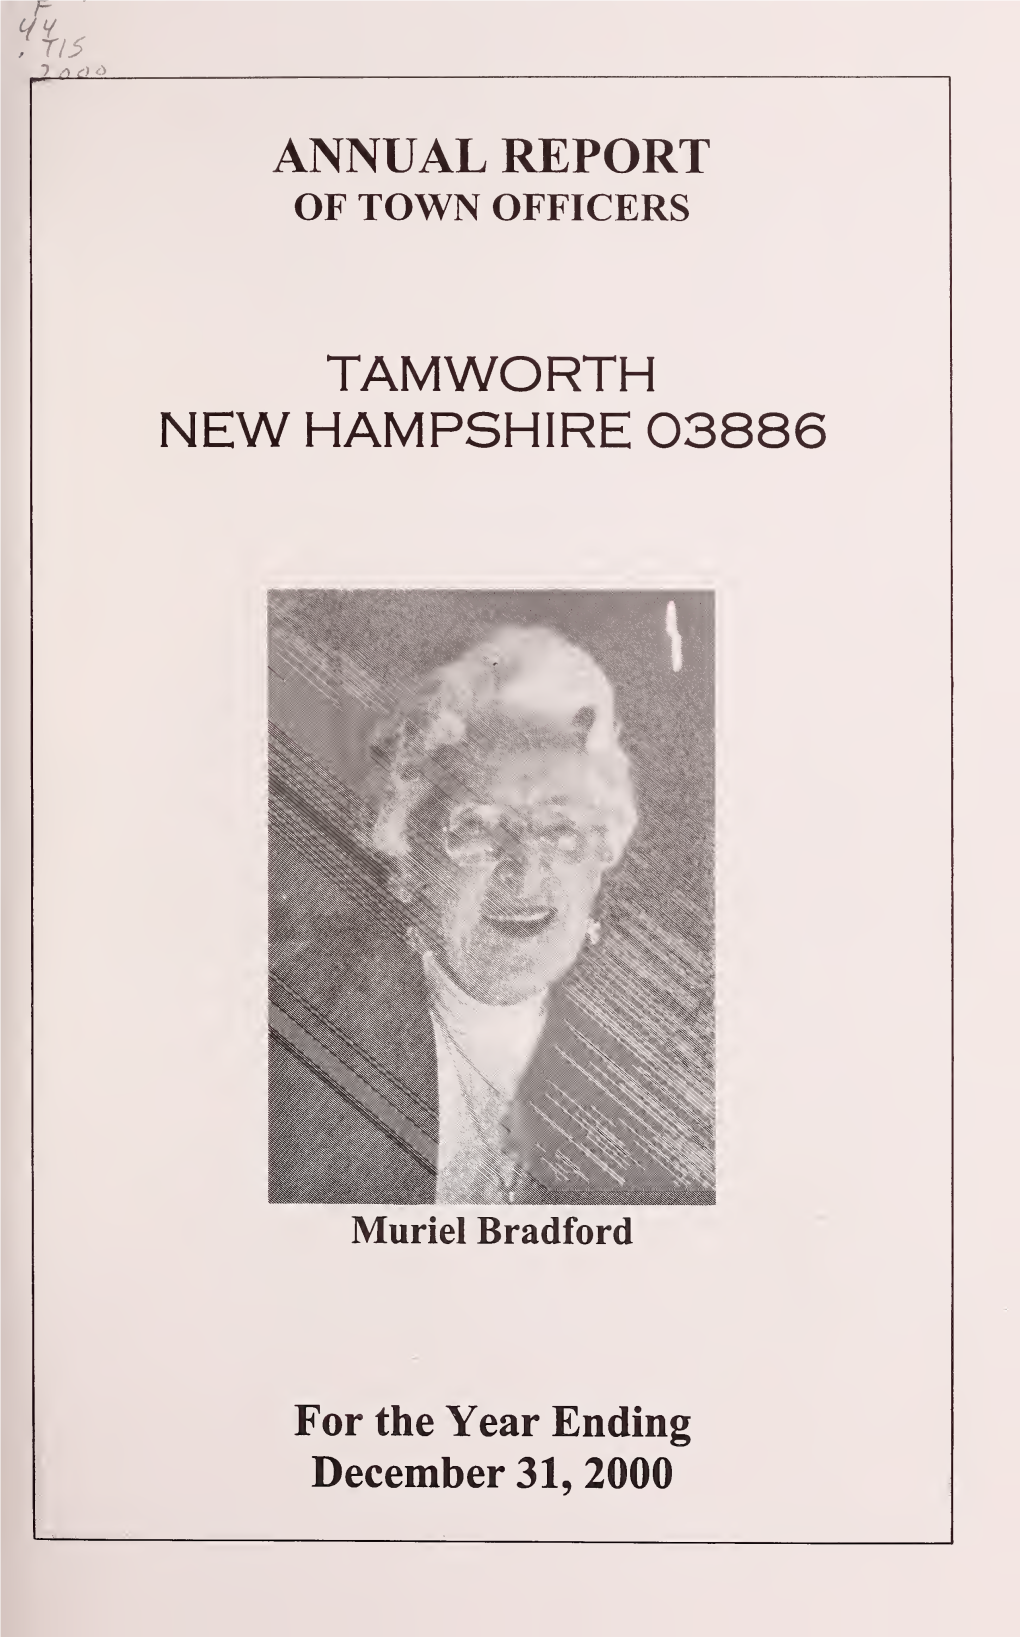 Annual Report of the Town of Tamworth, New Hampshire